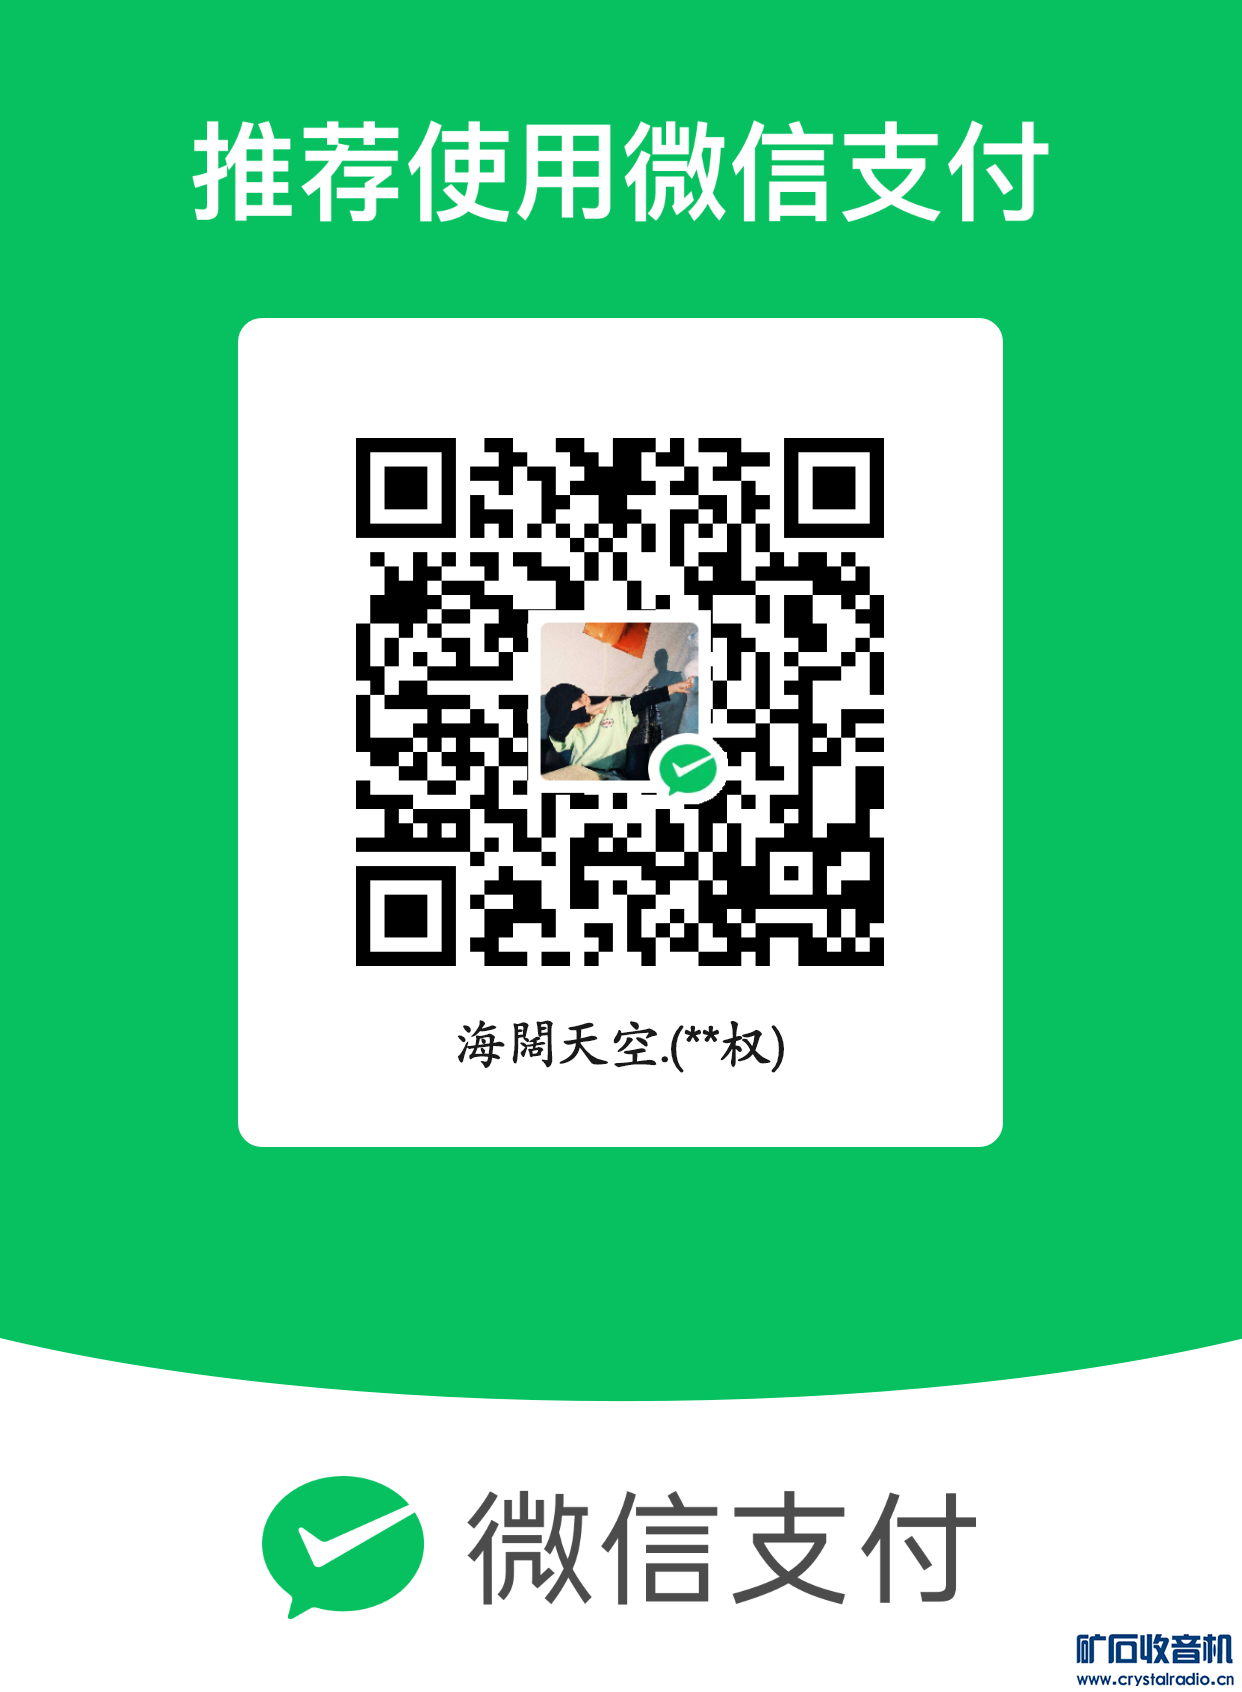 mm_facetoface_collect_qrcode_1701486648142.png